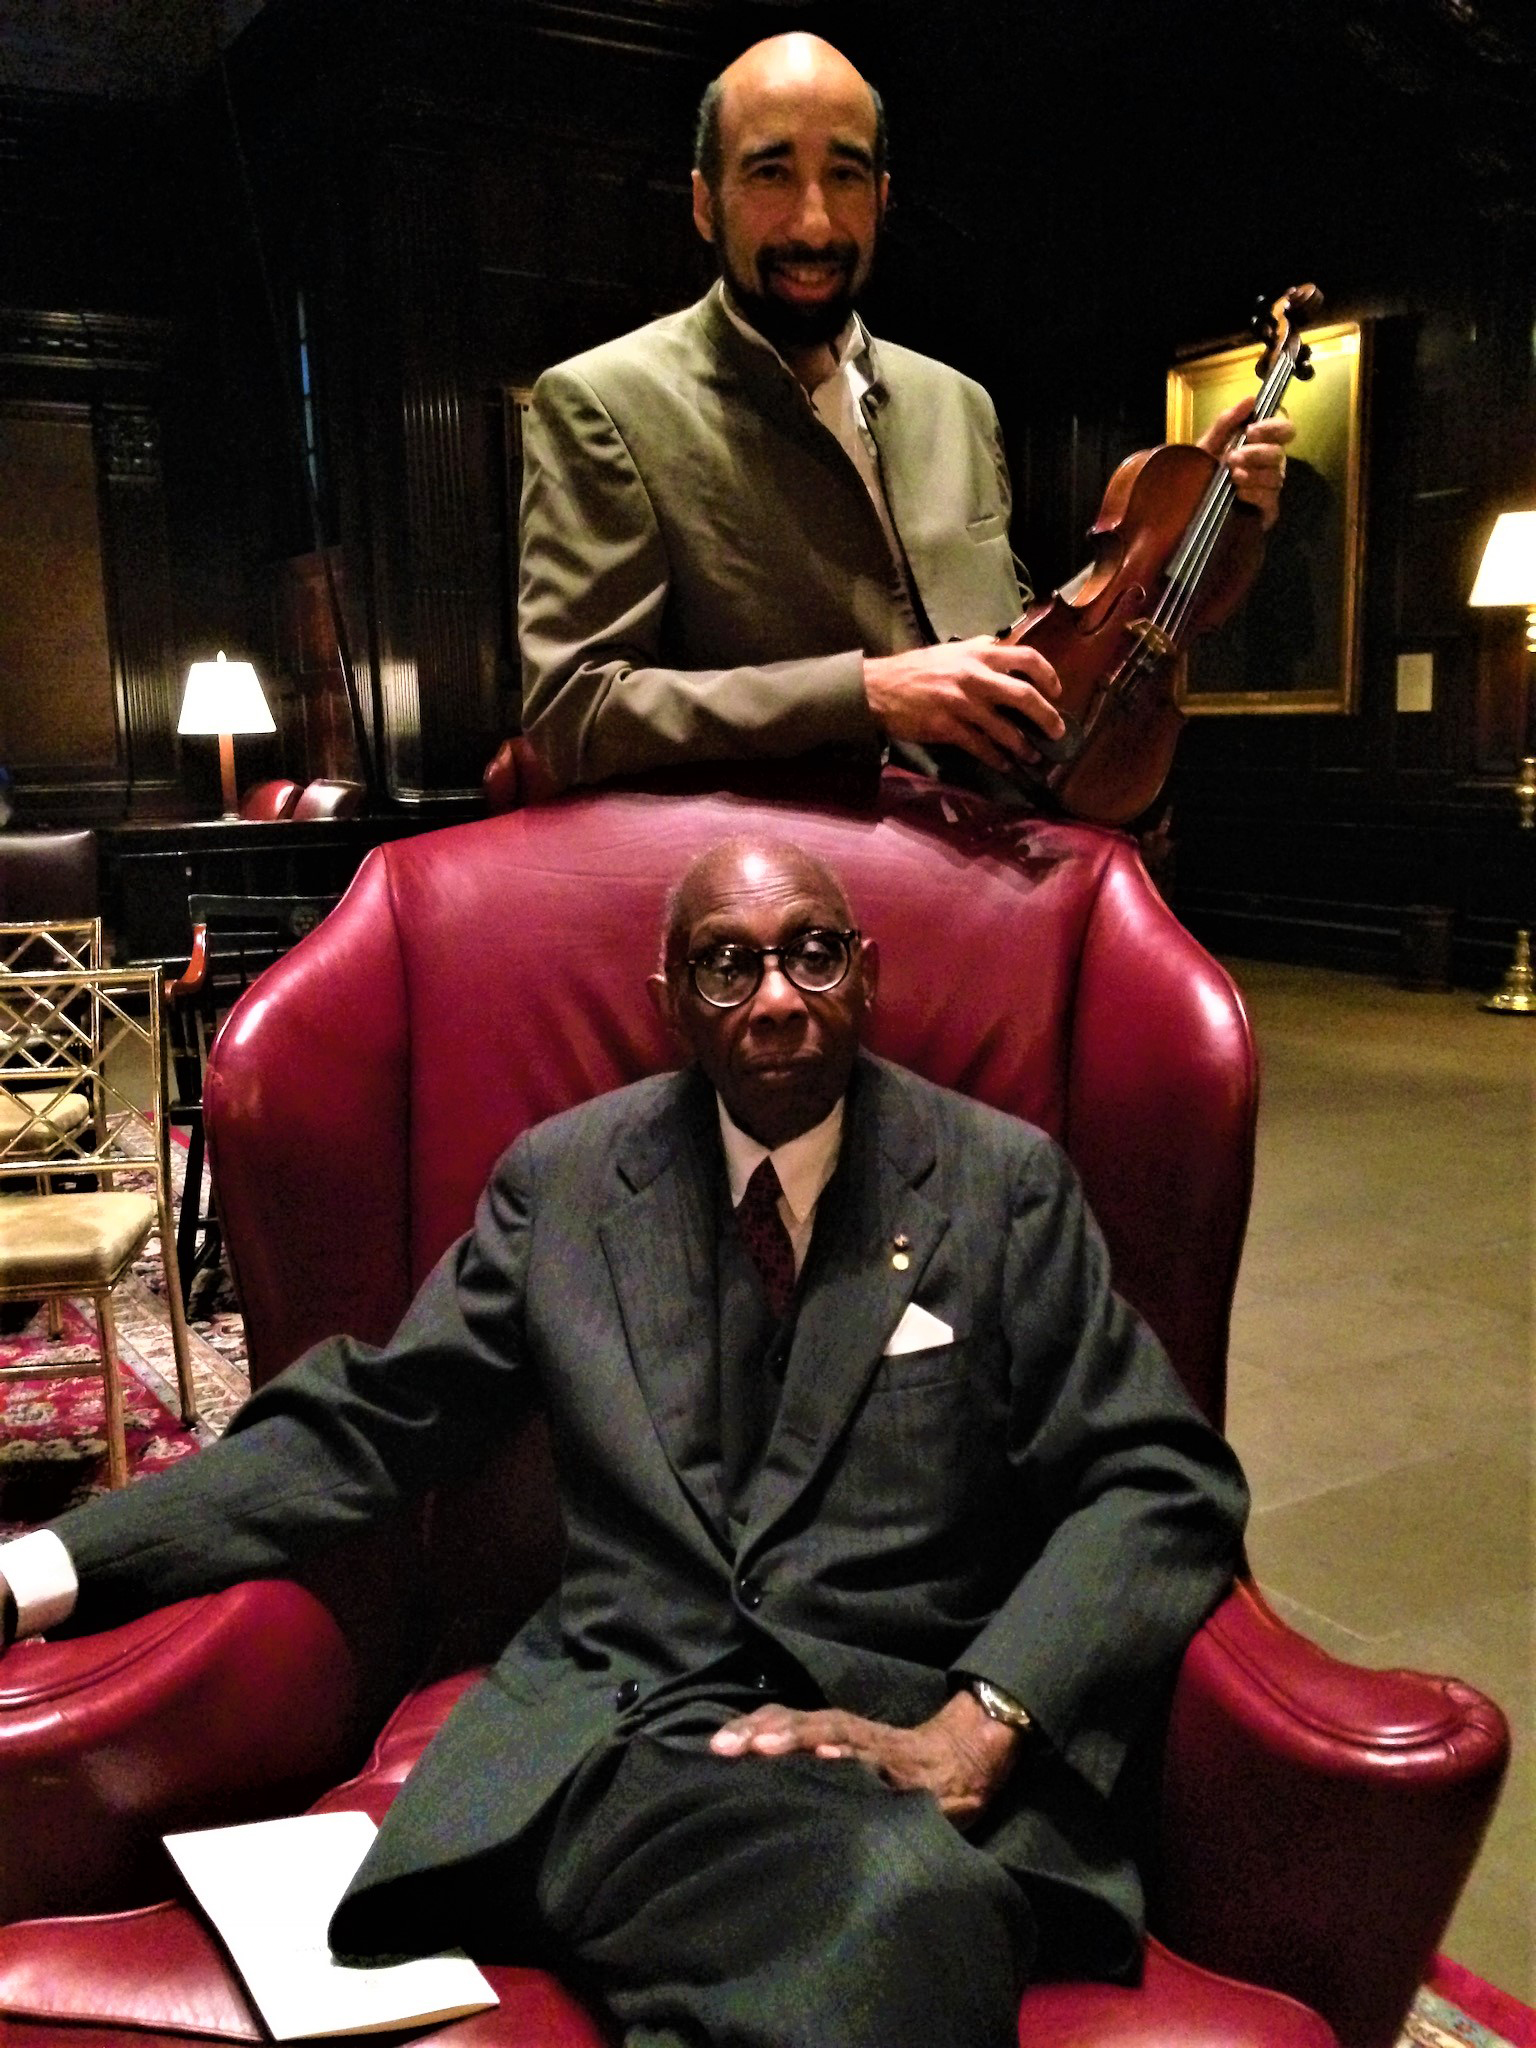 Gregory T. S. Walker standing and holding a violin with George Walker seated on a red chair.